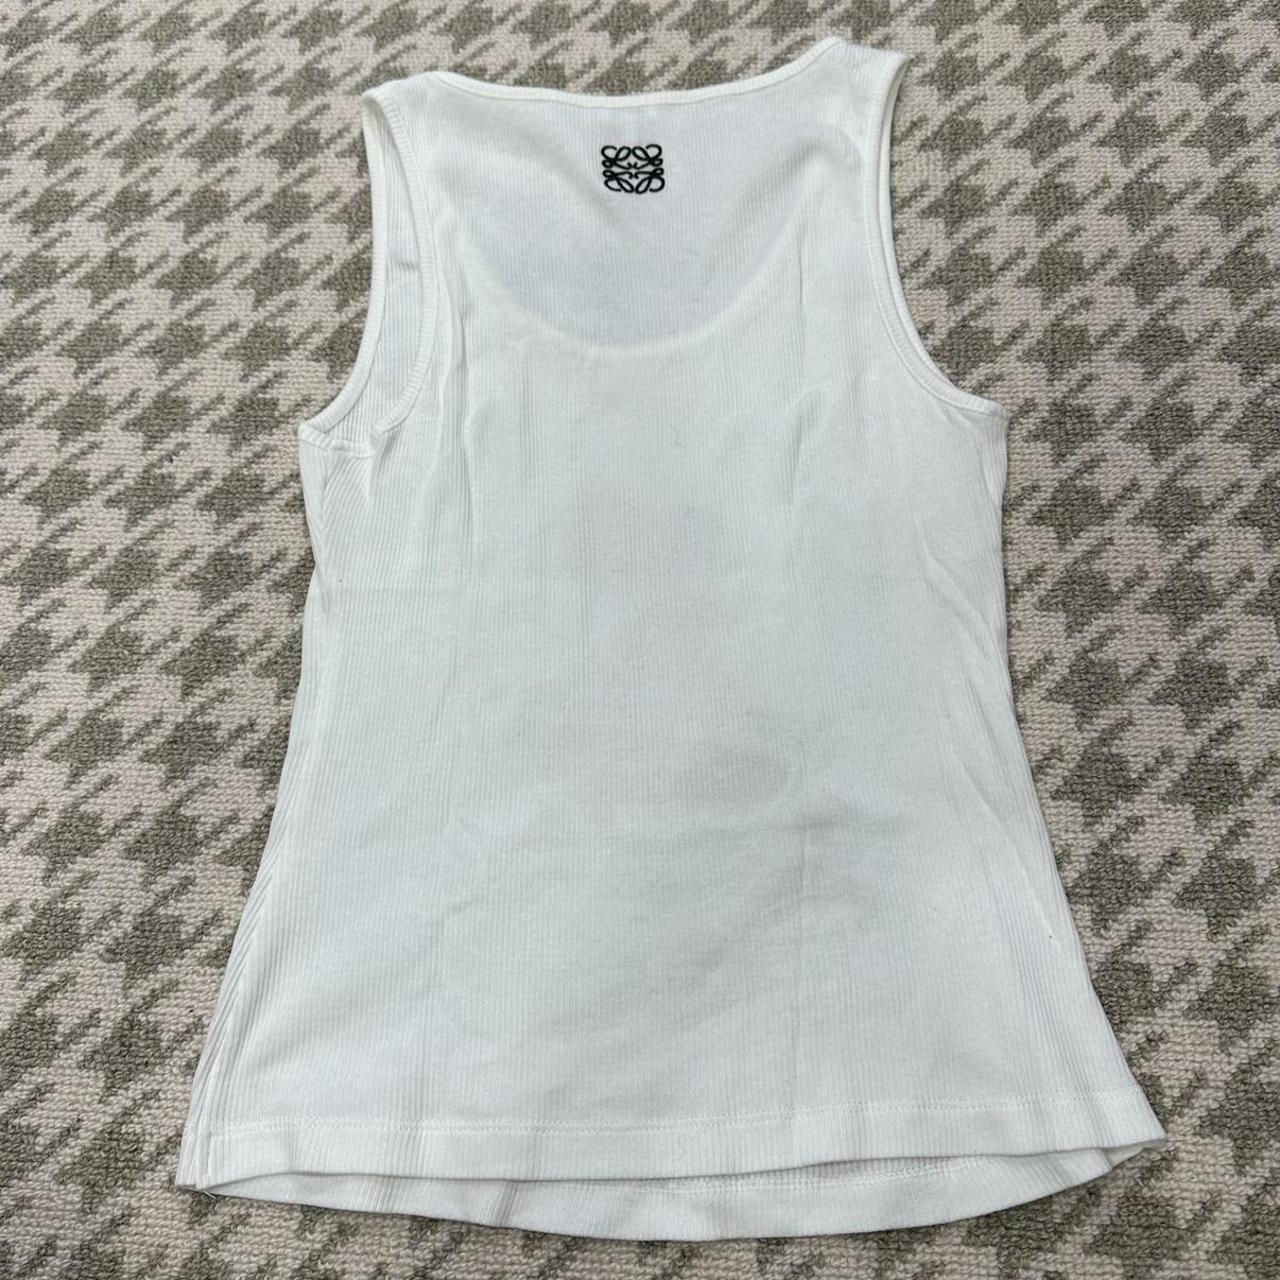 Loewe Women's White and Red Vests-tanks-camis (4)